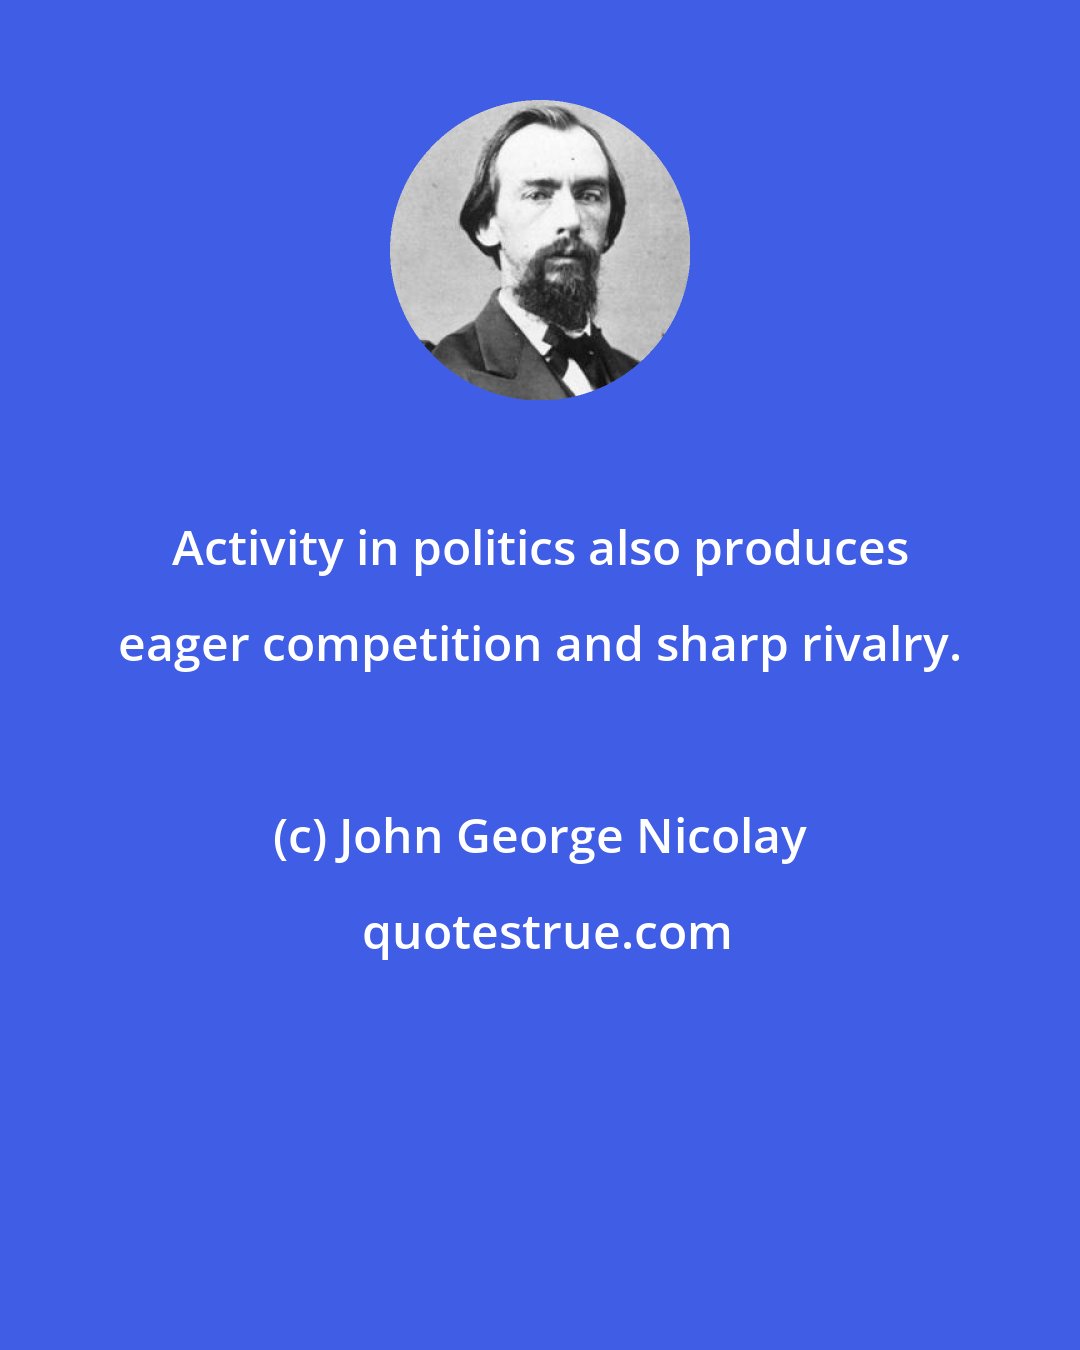 John George Nicolay: Activity in politics also produces eager competition and sharp rivalry.